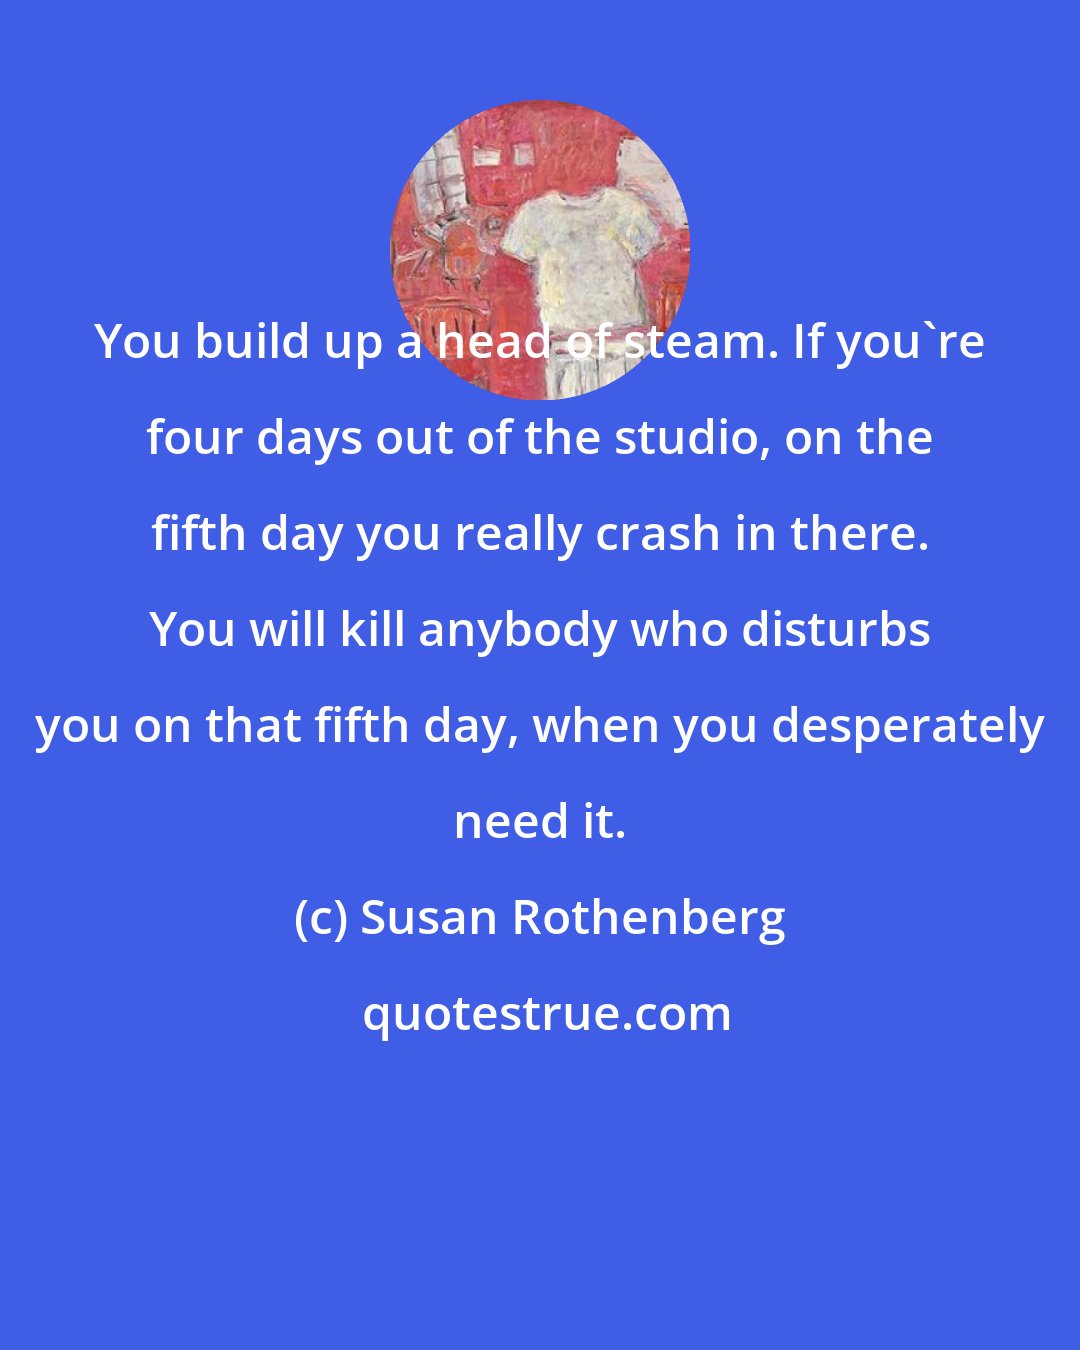 Susan Rothenberg: You build up a head of steam. If you're four days out of the studio, on the fifth day you really crash in there. You will kill anybody who disturbs you on that fifth day, when you desperately need it.